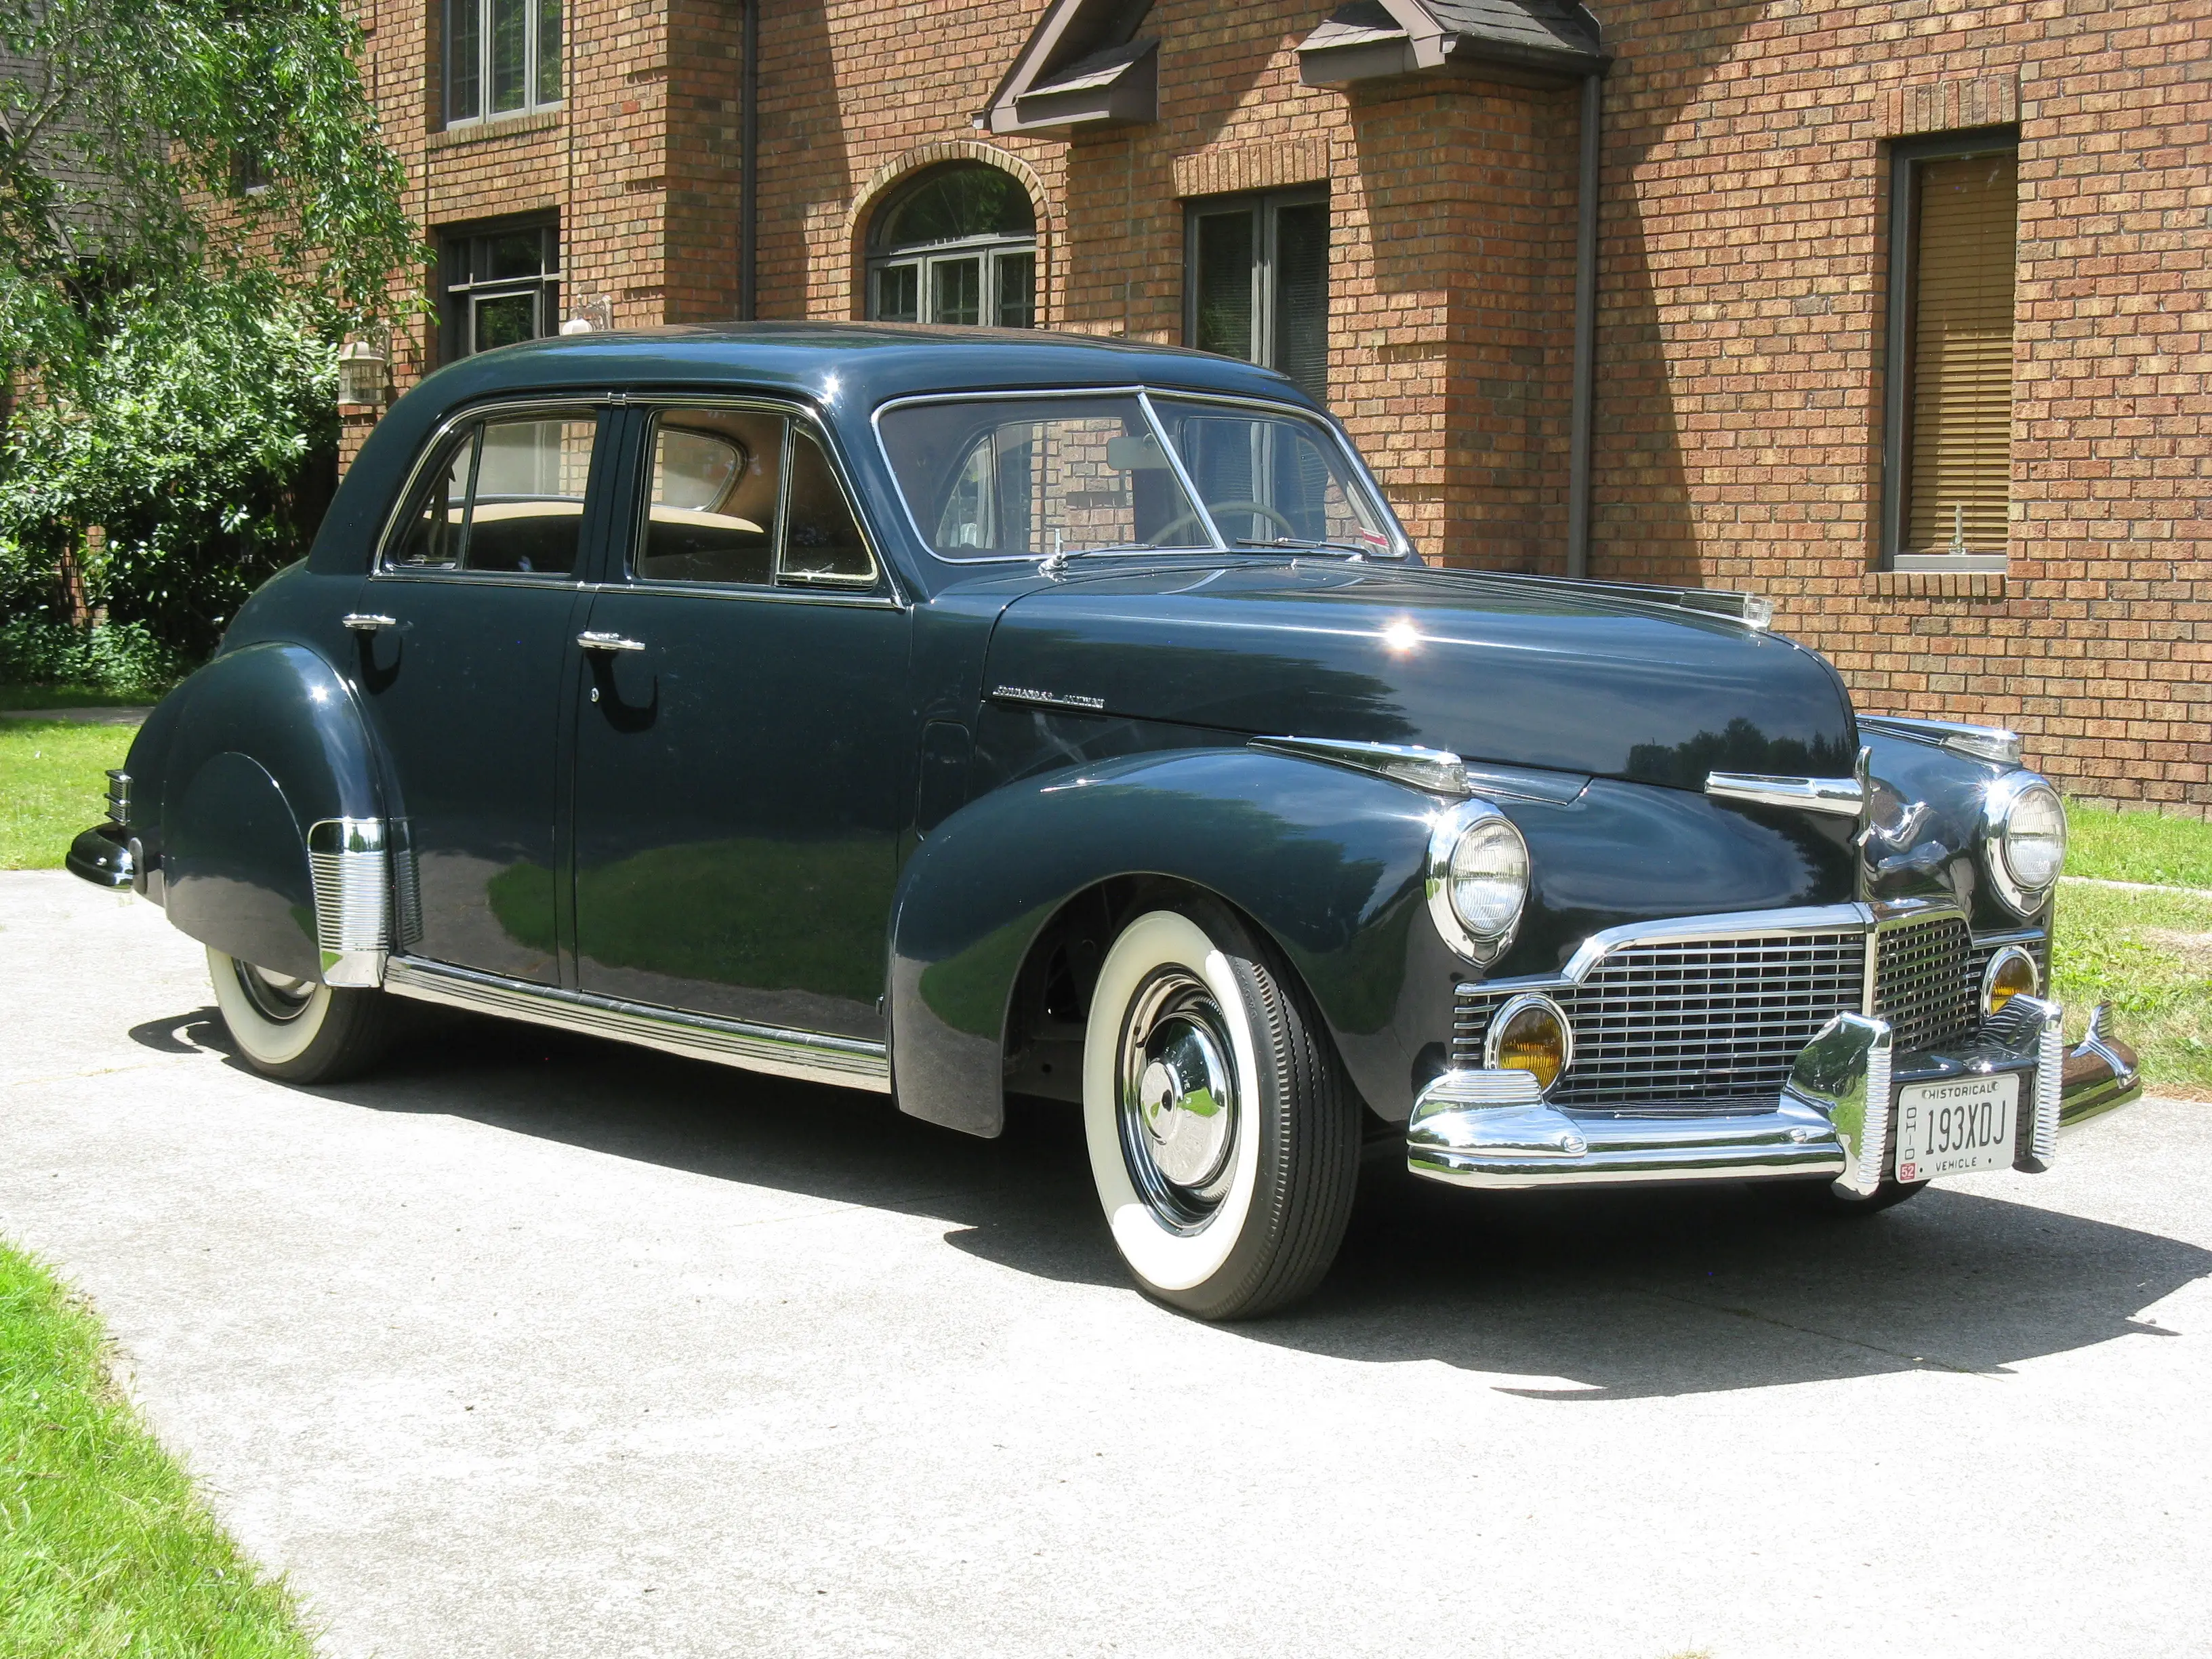 The History of the 1948 Studebaker Land Cruiser A Classic American Car